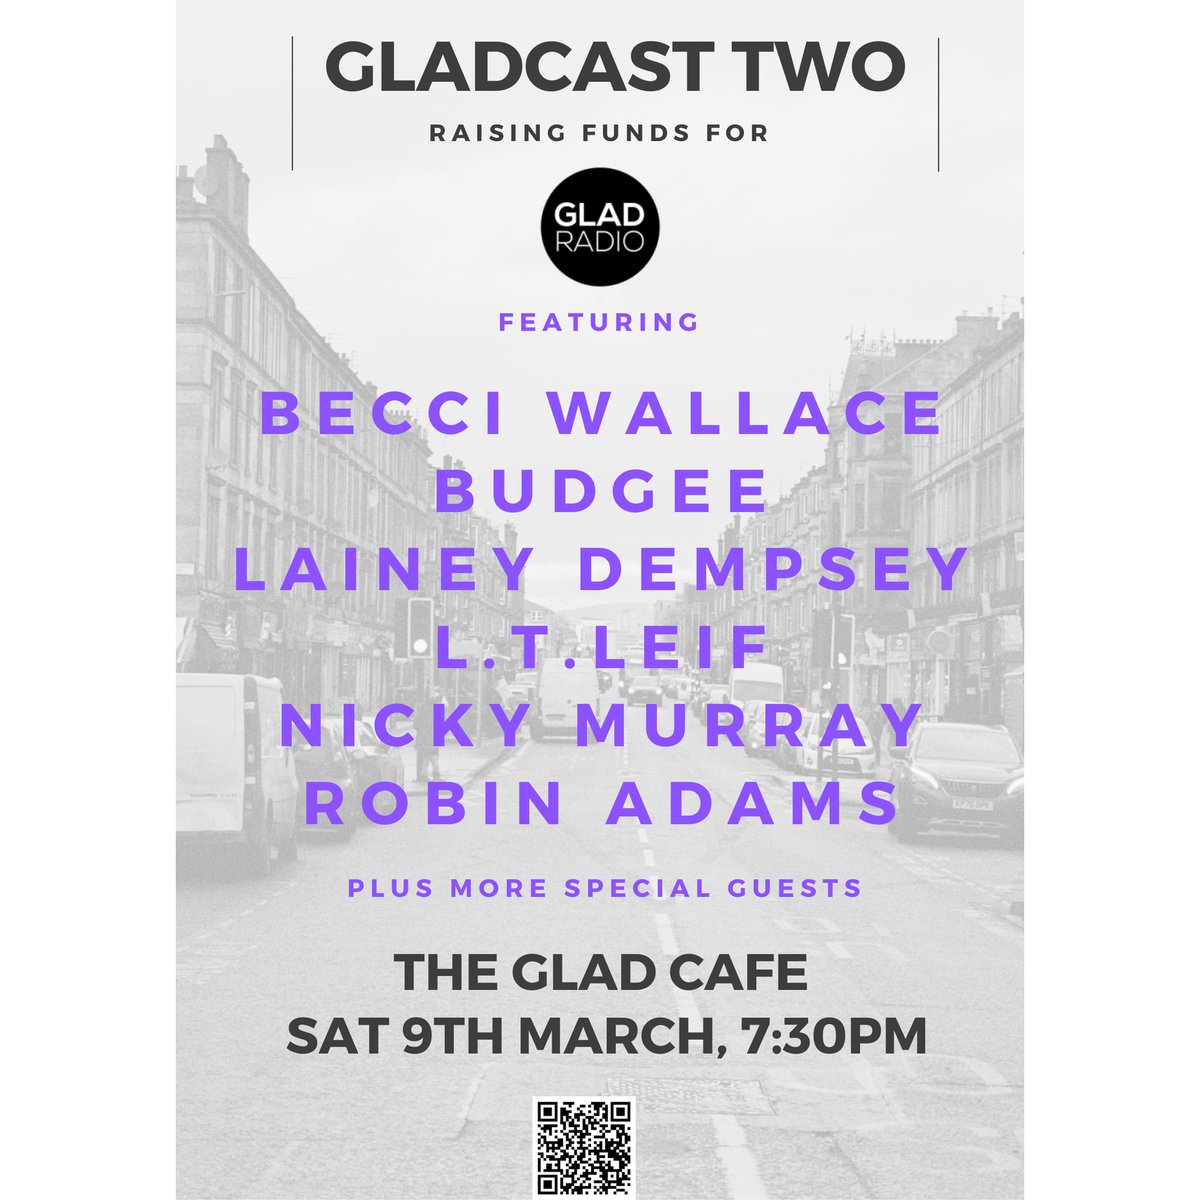 This Saturday night at @thegladcafe. Please come if you can for a great night of music, and to support @gladradio
gladcasttwo.brownpapertickets.com